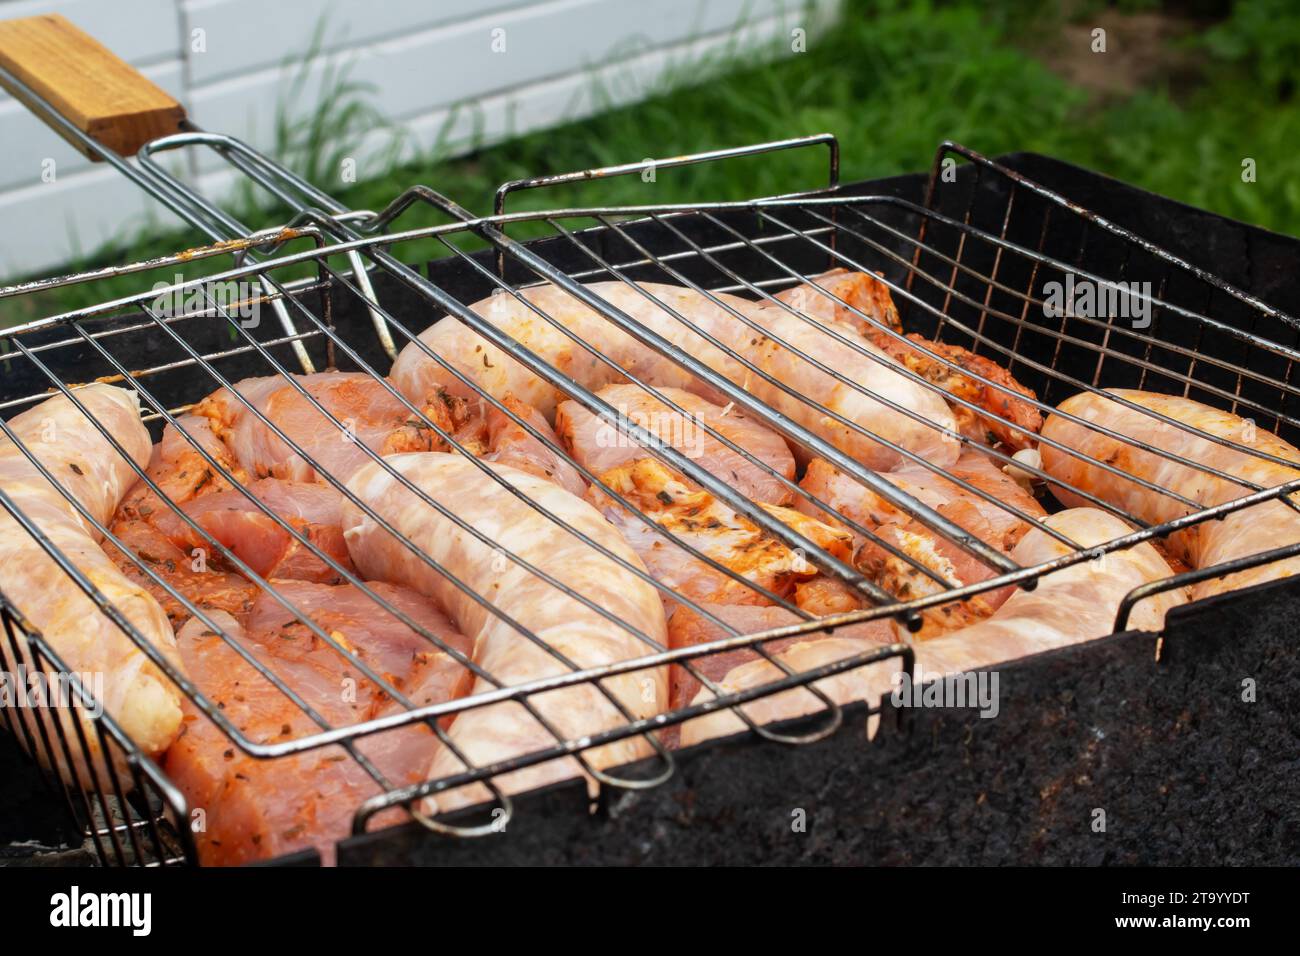 https://c8.alamy.com/comp/2T9YYDT/meat-and-sausage-on-a-grill-close-up-2T9YYDT.jpg